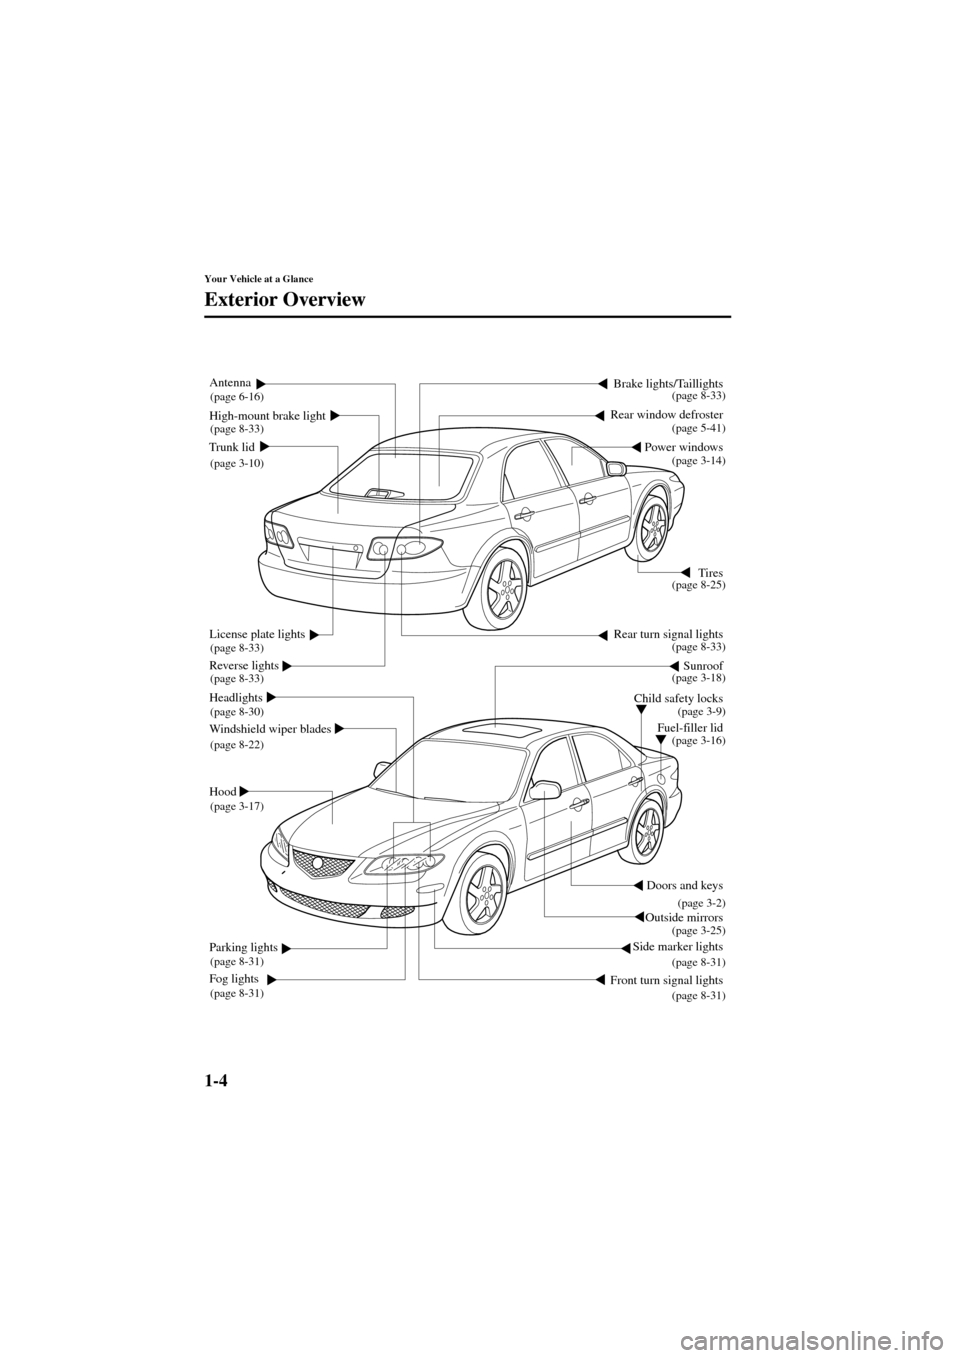 MAZDA MODEL 6 2004  Owners Manual (in English) 1-4
Your Vehicle at a Glance
Form No. 8R29-EA-02I
Exterior Overview
Doors and keys
Outside mirrors Headlights
Fuel-filler lid Child safety locksTires
Reverse lights
Windshield wiper blades
Hood
Front 